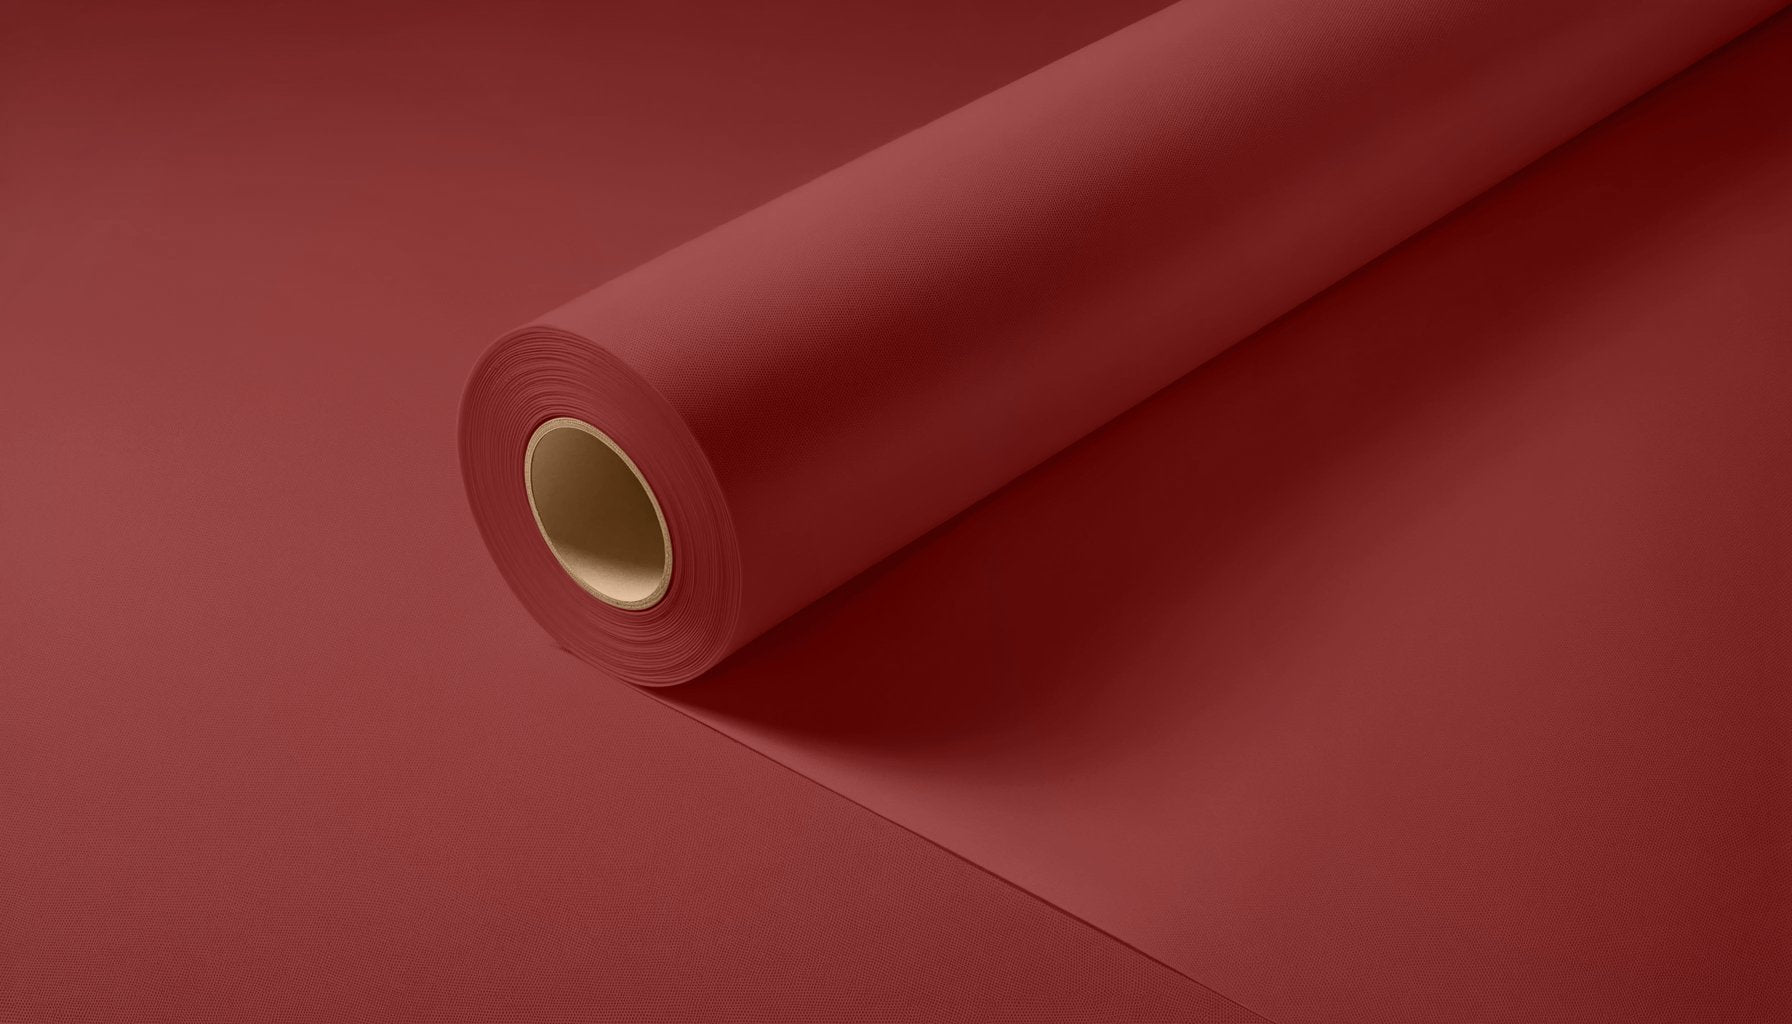 Peel & Stick Removable Re-usable Paint - Color RAL 3011 Brown Red - offRAL™ - RALRAW LLC, USA